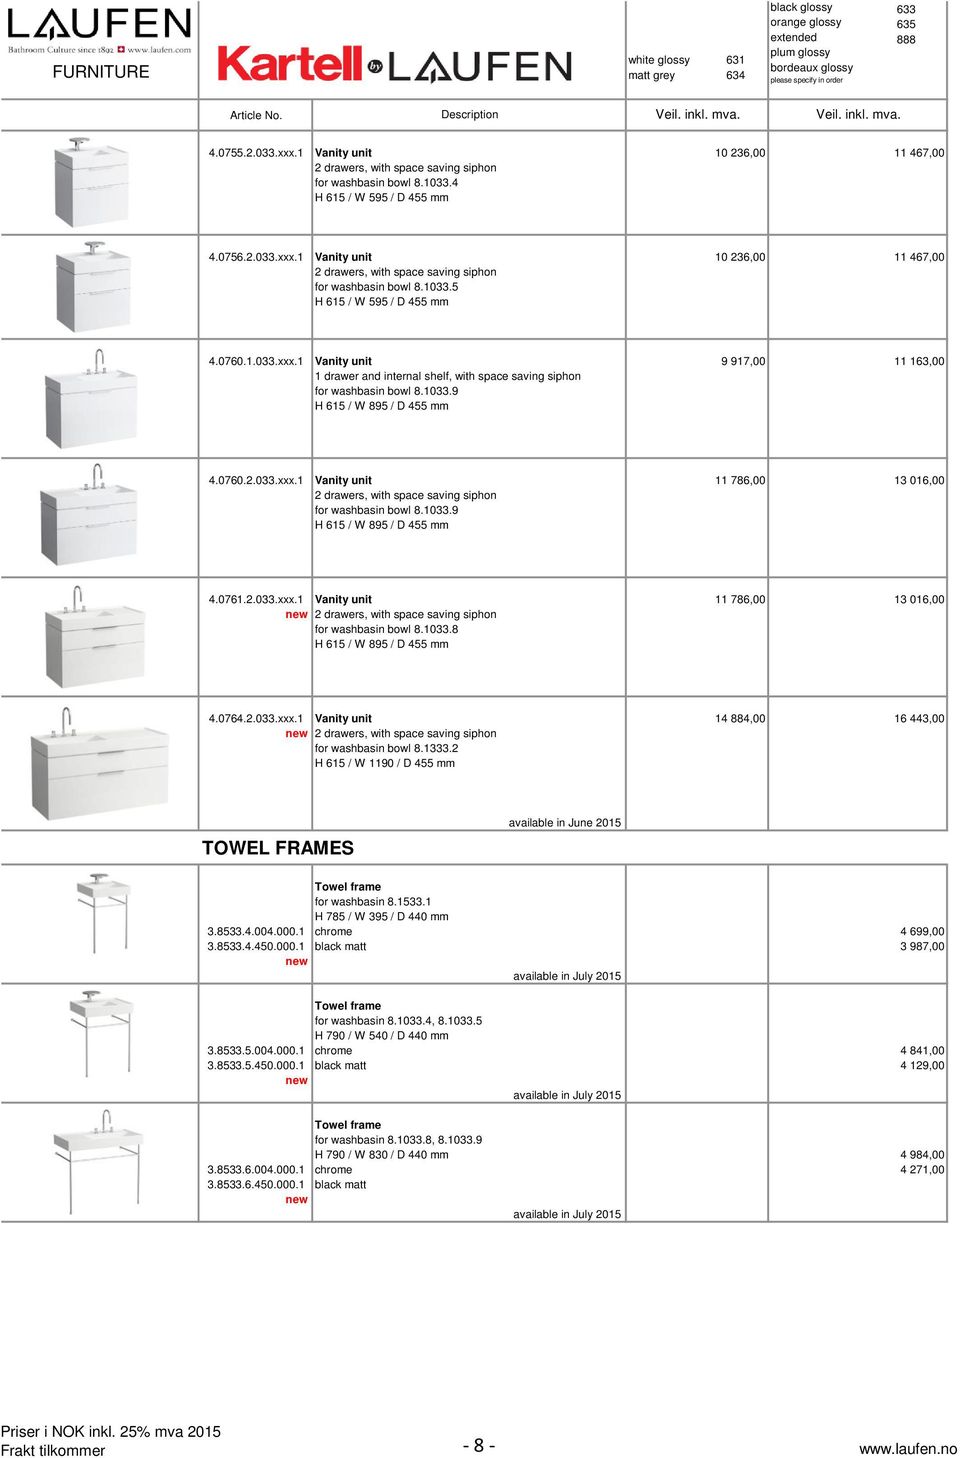 1 Vanity unit 10 236,00 2 drawers, with space saving siphon for washbasin bowl 8.1033.5 H 615 / W 595 / D 455 mm 11 467,00 4.0760.1.033.xxx.